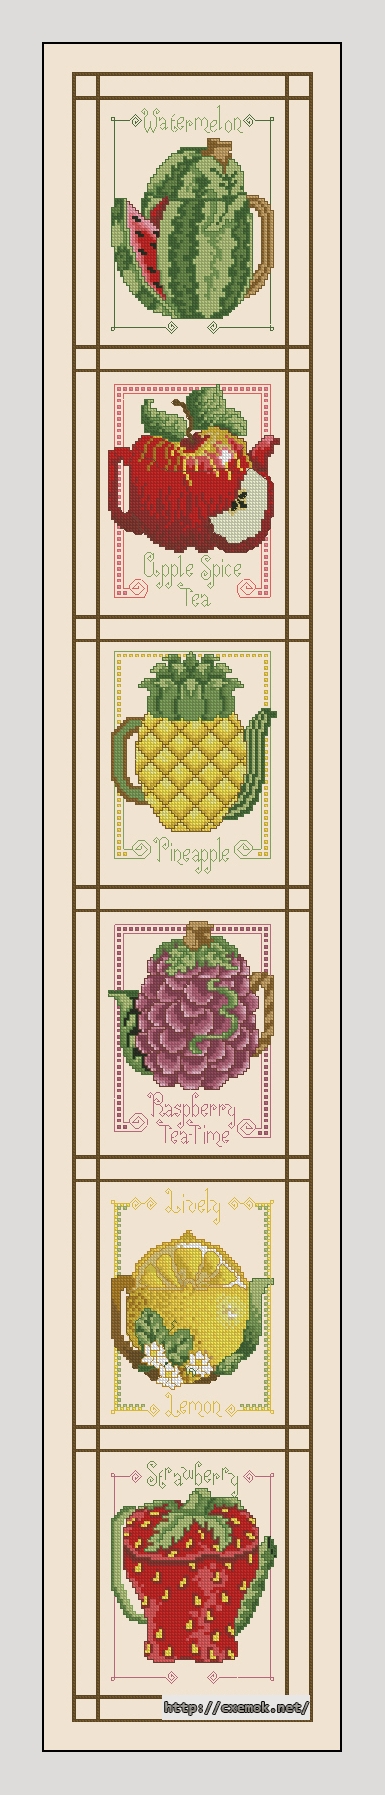 Download embroidery patterns by cross-stitch  - Fresh fruit teapots